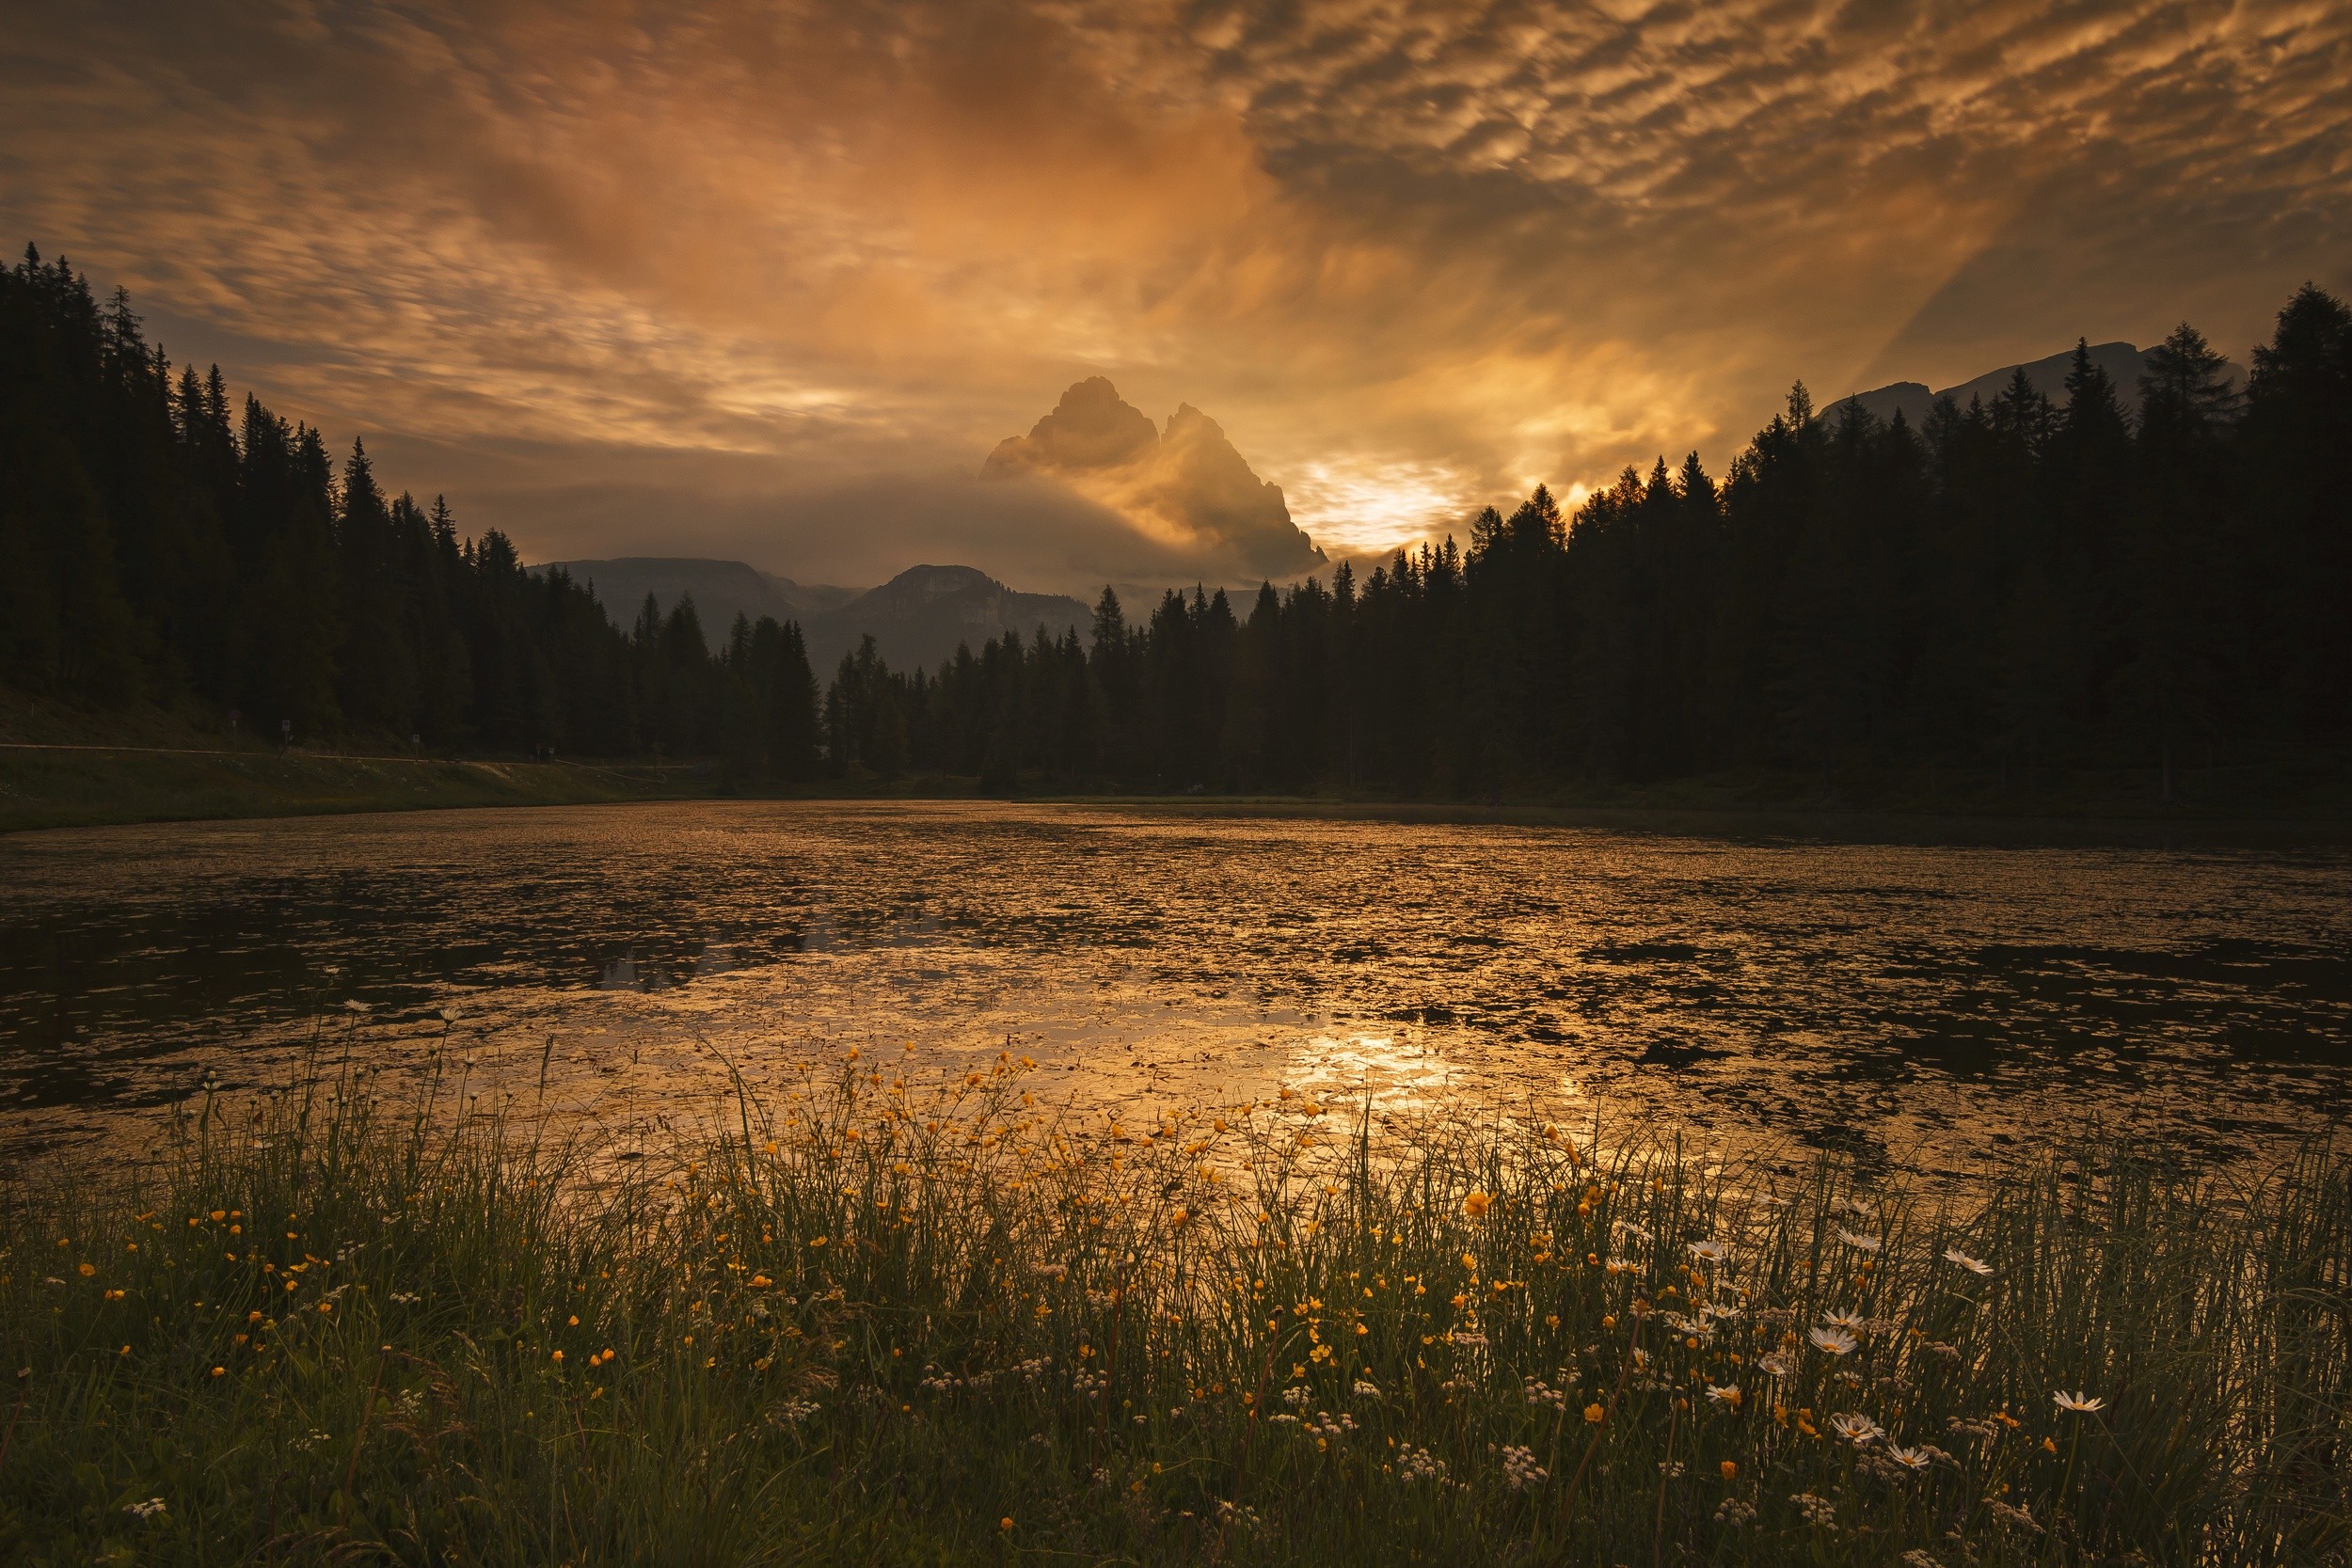 photography, Nature, Landscape, Morning, Sunlight, Sunrise, Wildflowers, Gold, Sky, River, Mountains, Forest Wallpaper